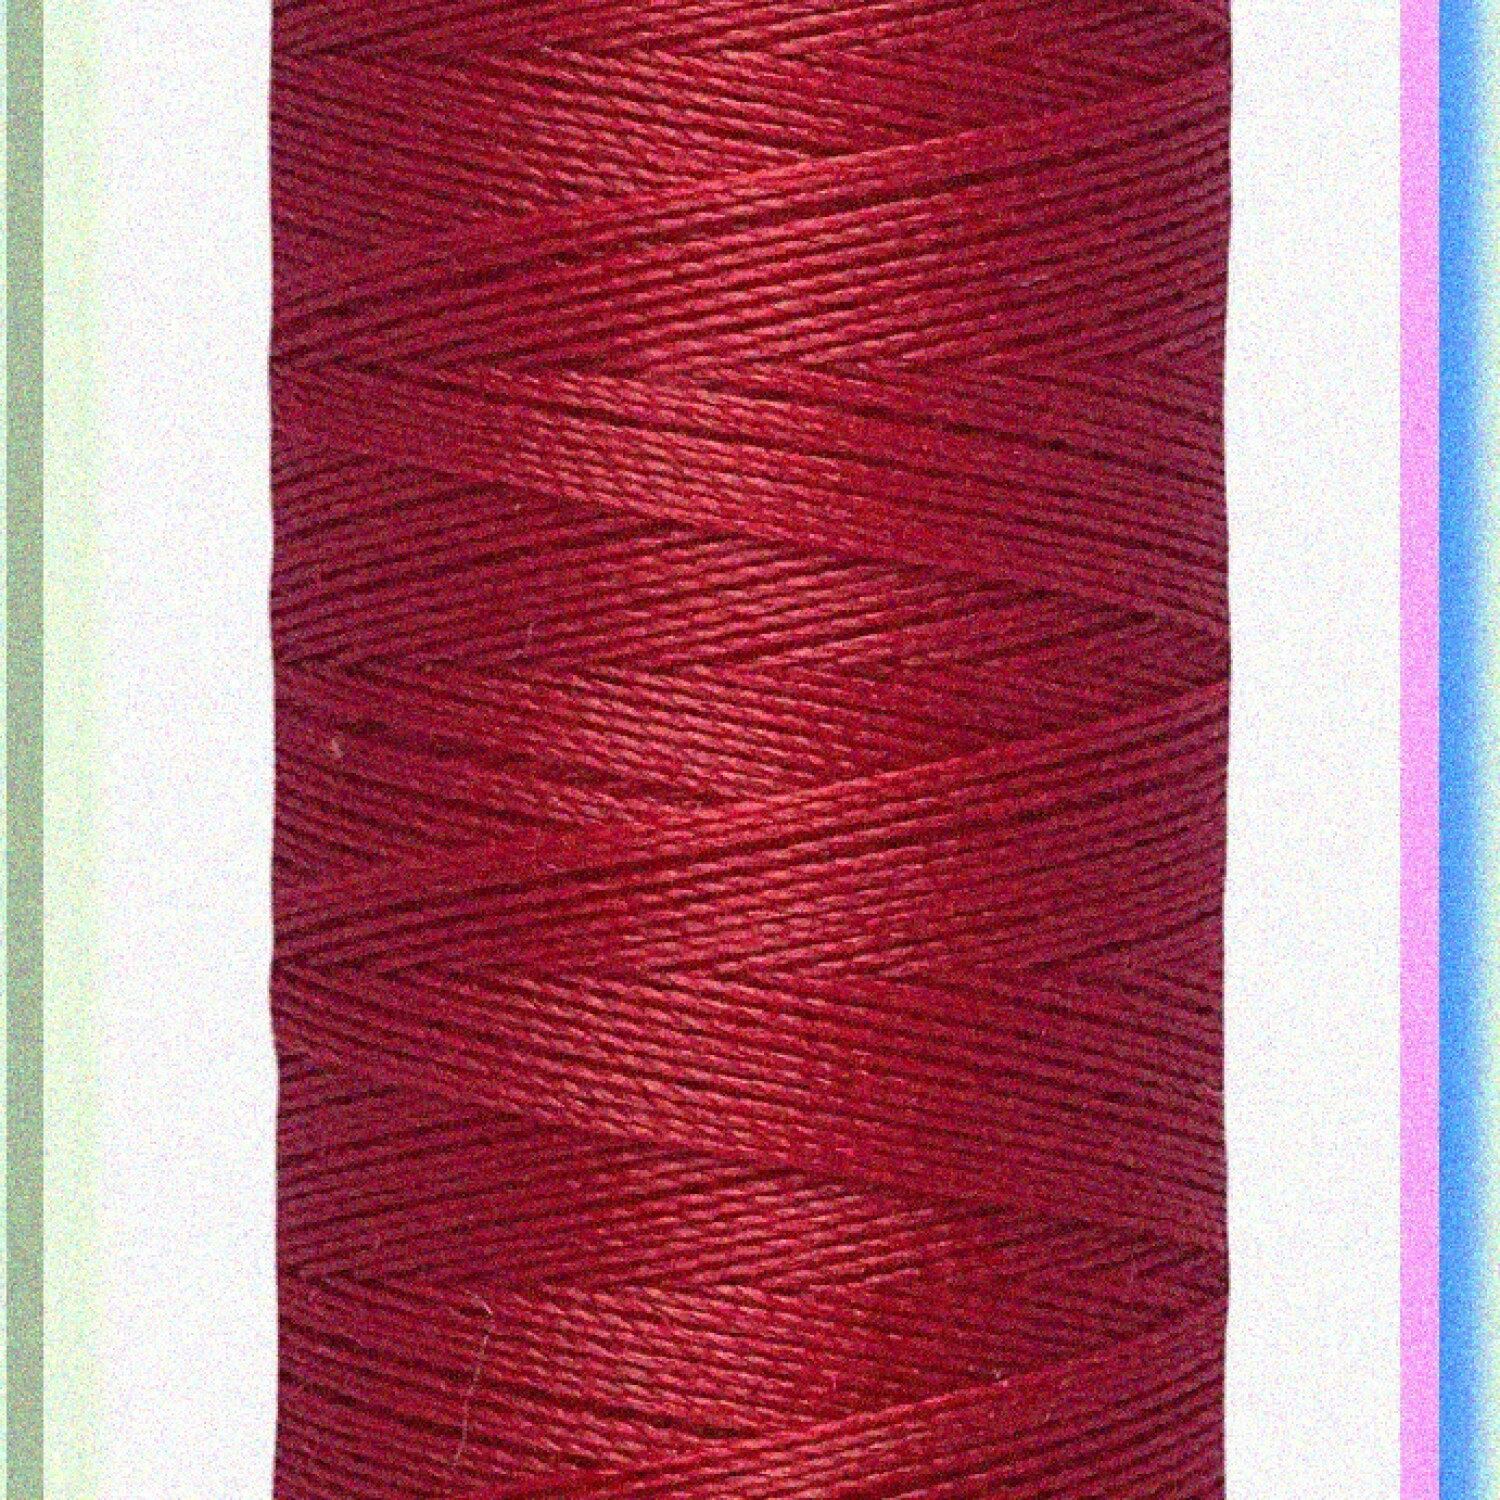 StitchMaster 110yds - Spicy Chili Red Thread